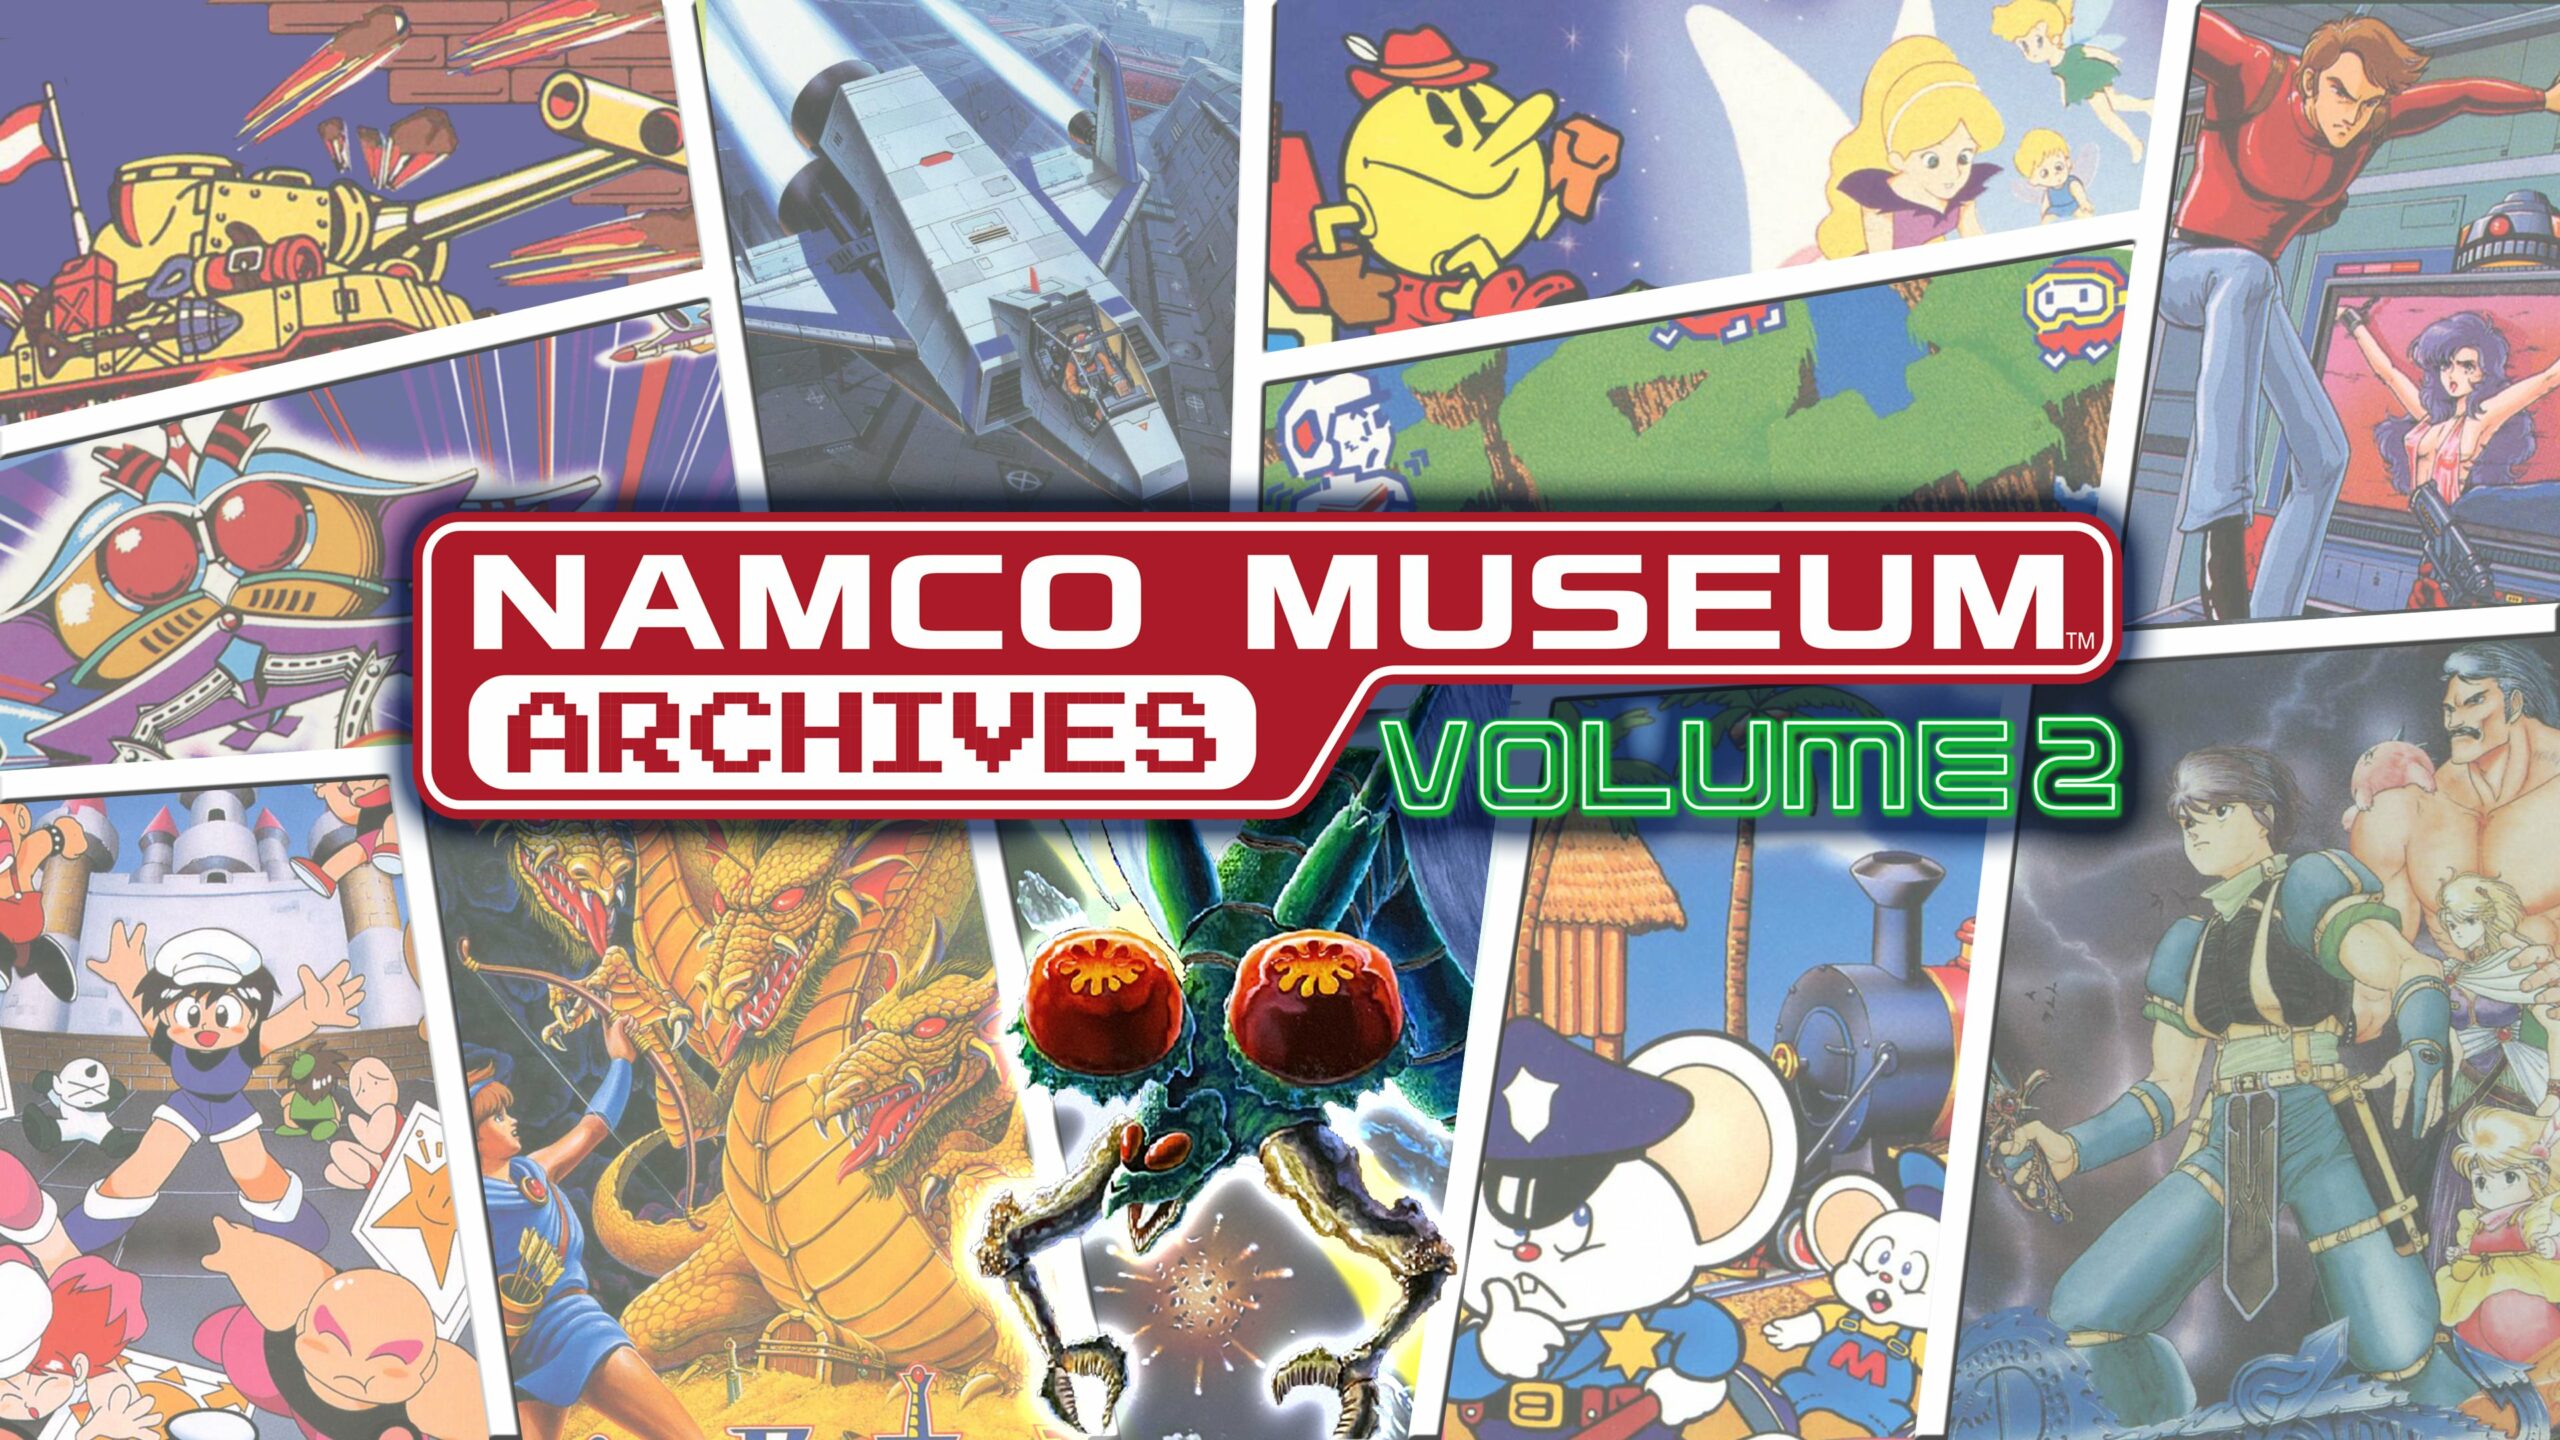 Namco-Museum-Archives_2020_06-11-20_002-scaled.jpg